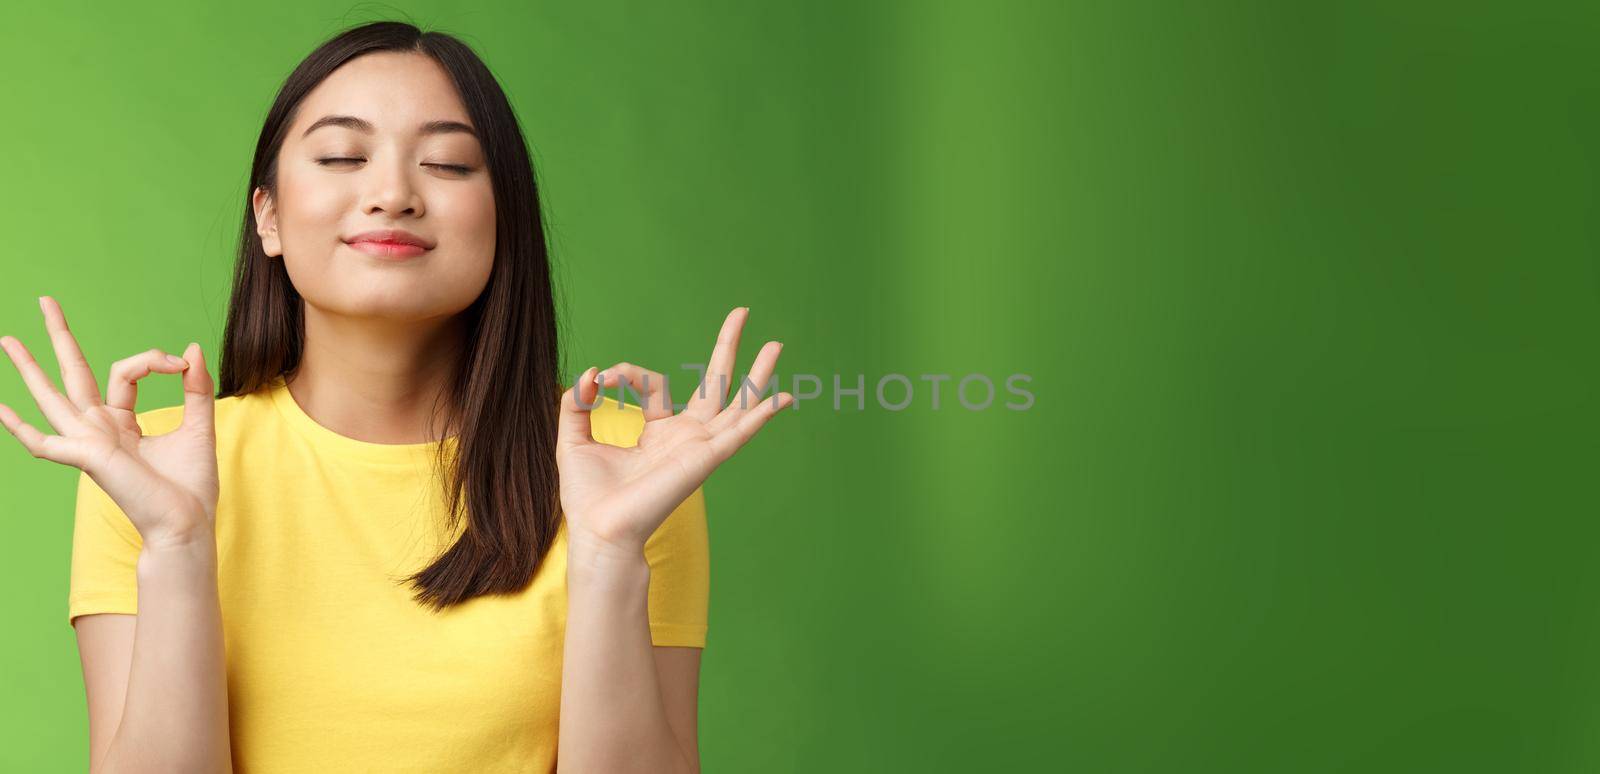 Peaceful charming asian girl brunette inhale fresh air, relaxing breathing happily, close eyes smiling, hold hands zen mudra signs reach nirvana, meditation, practice yoga, green background.